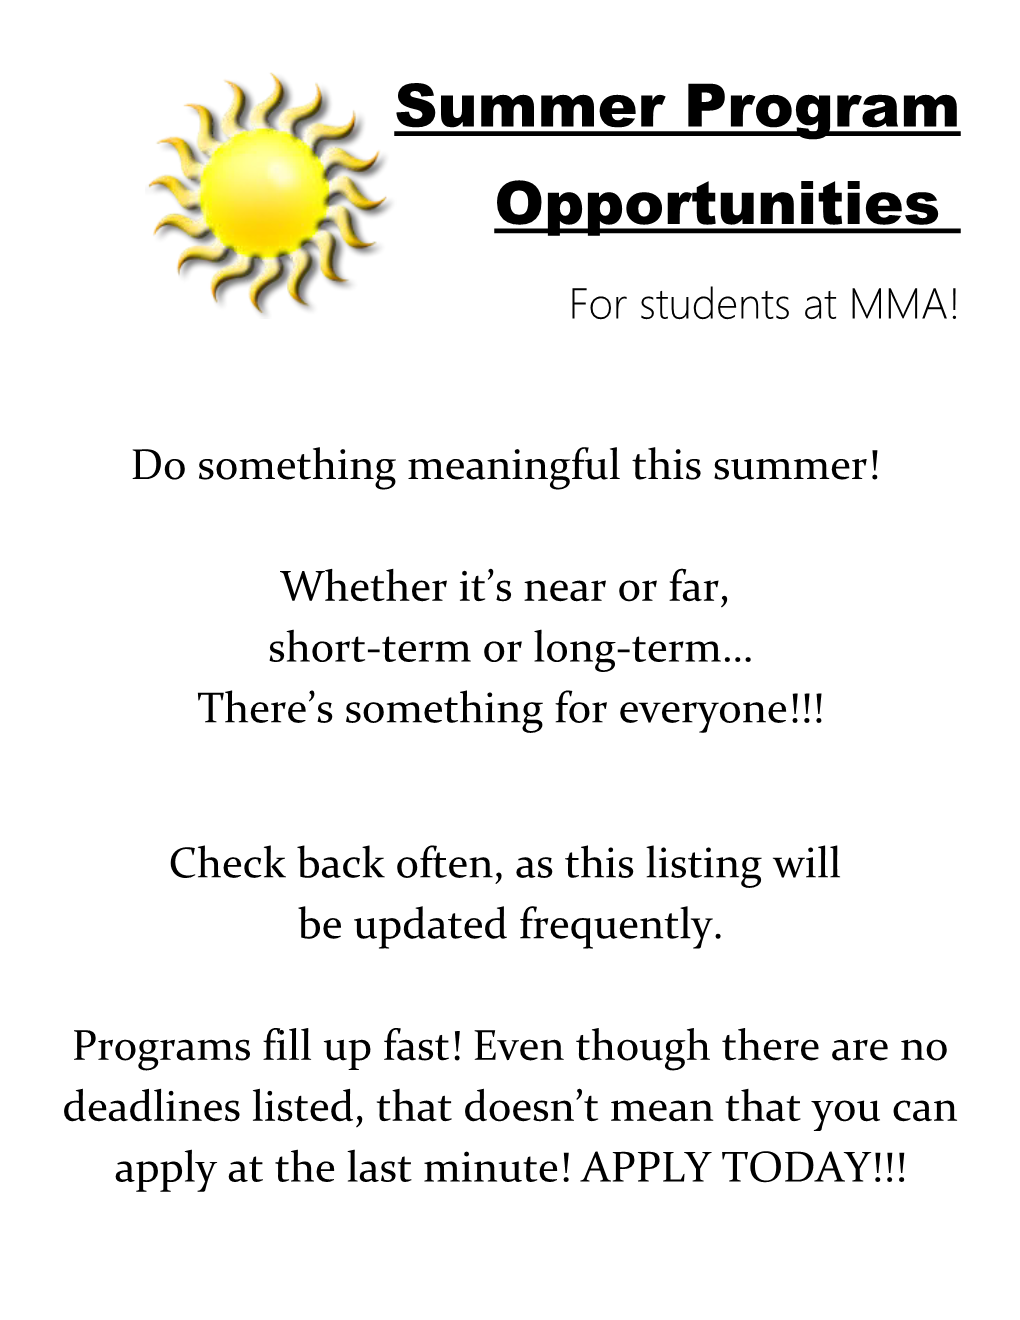 Do Something Meaningful This Summer!